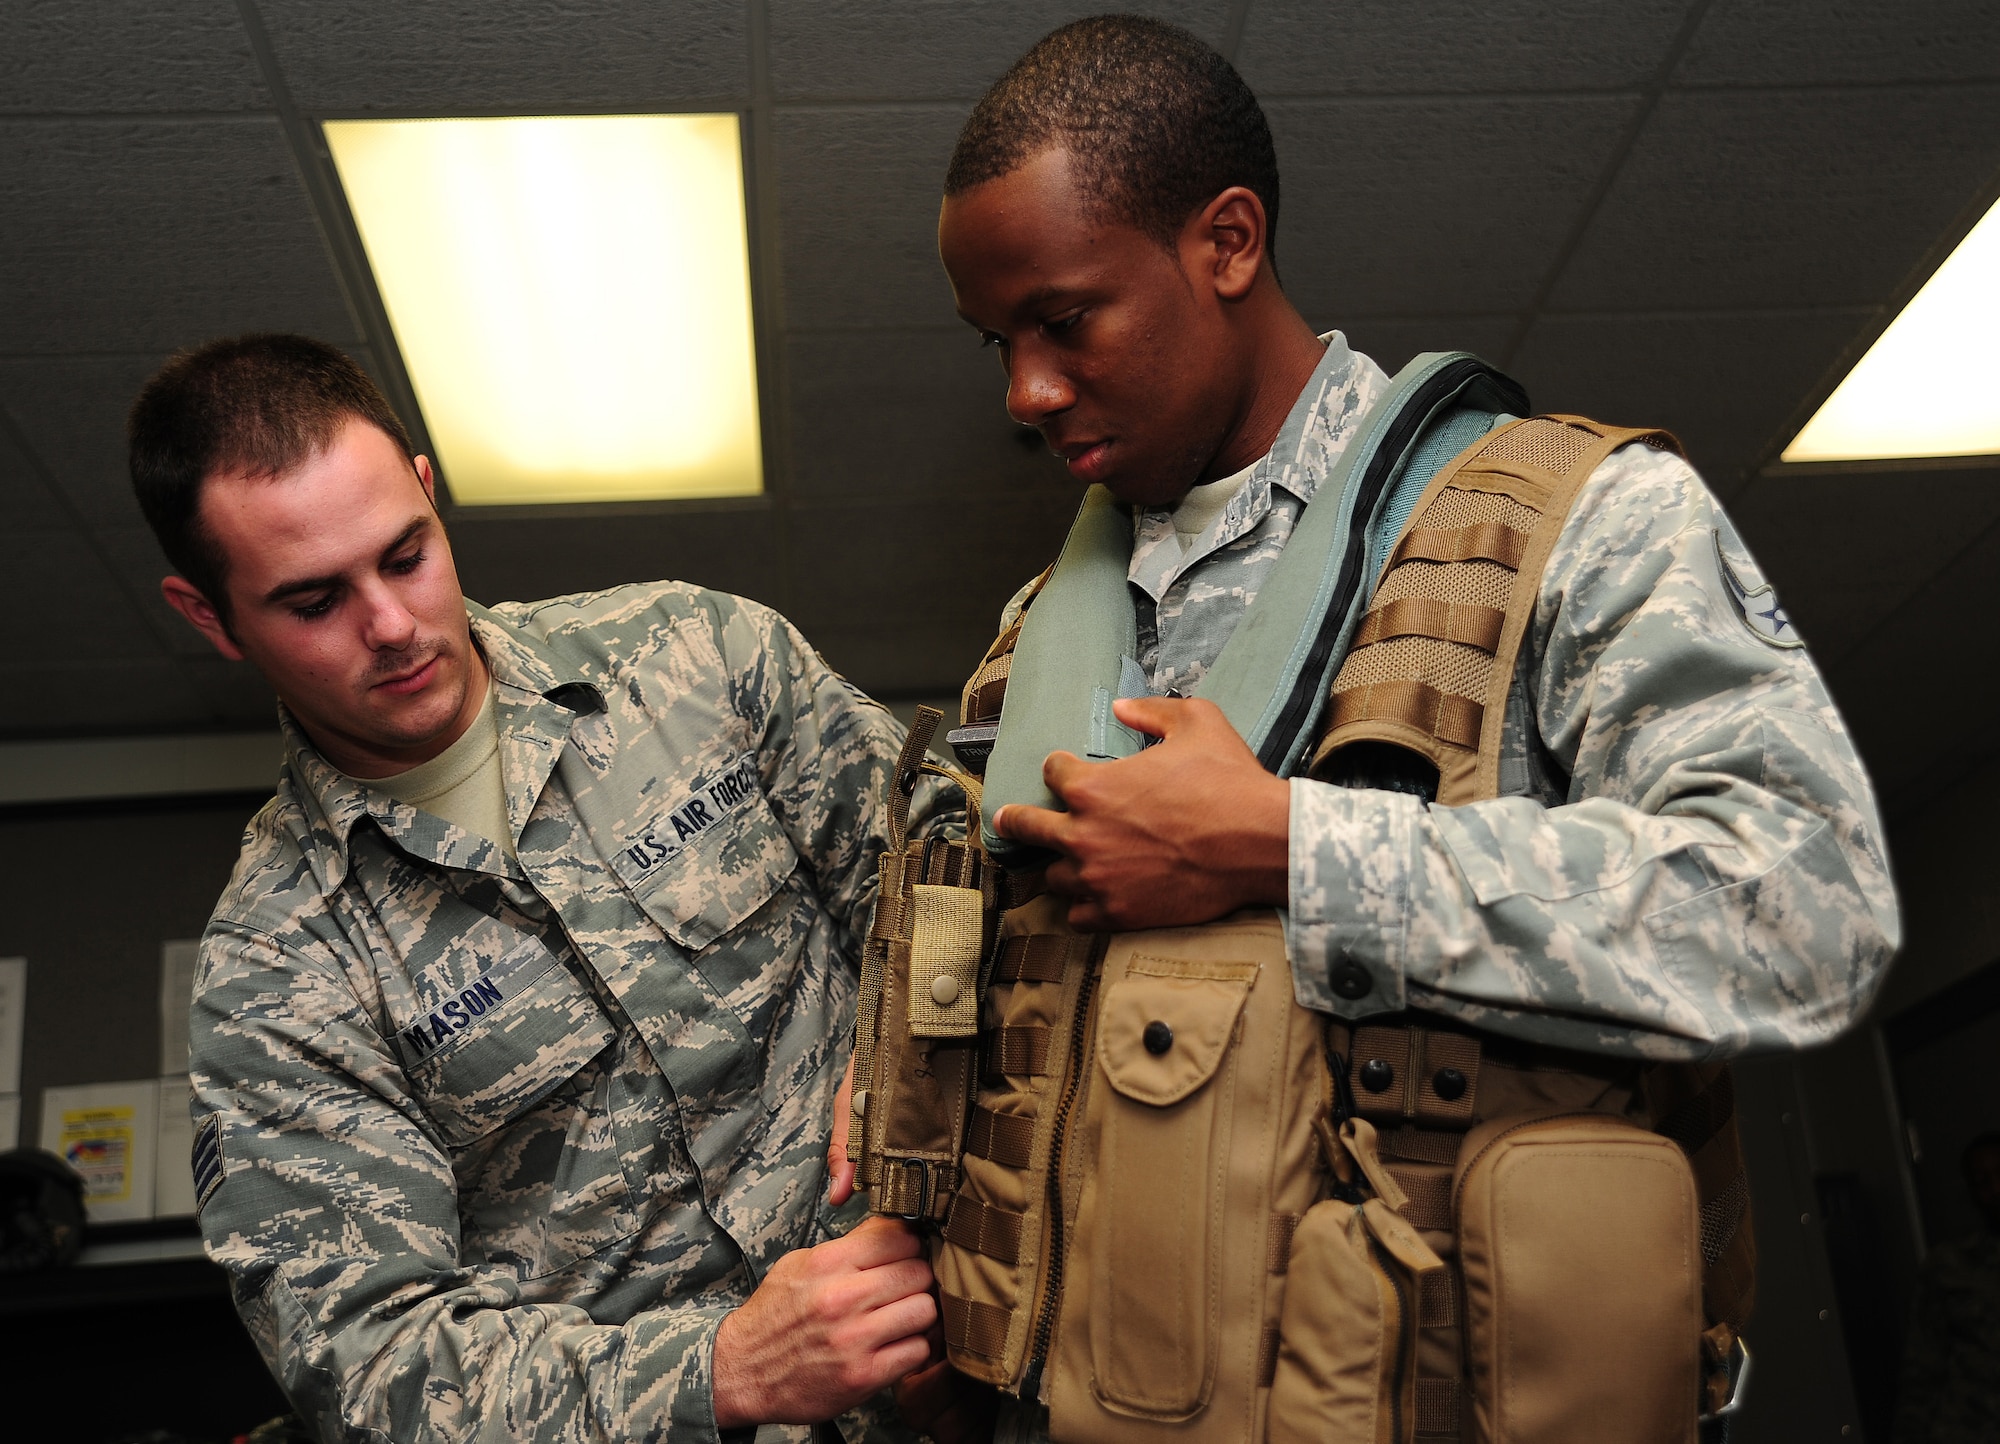 Airsave vest provides peace of mind to aircrew > Whiteman Air